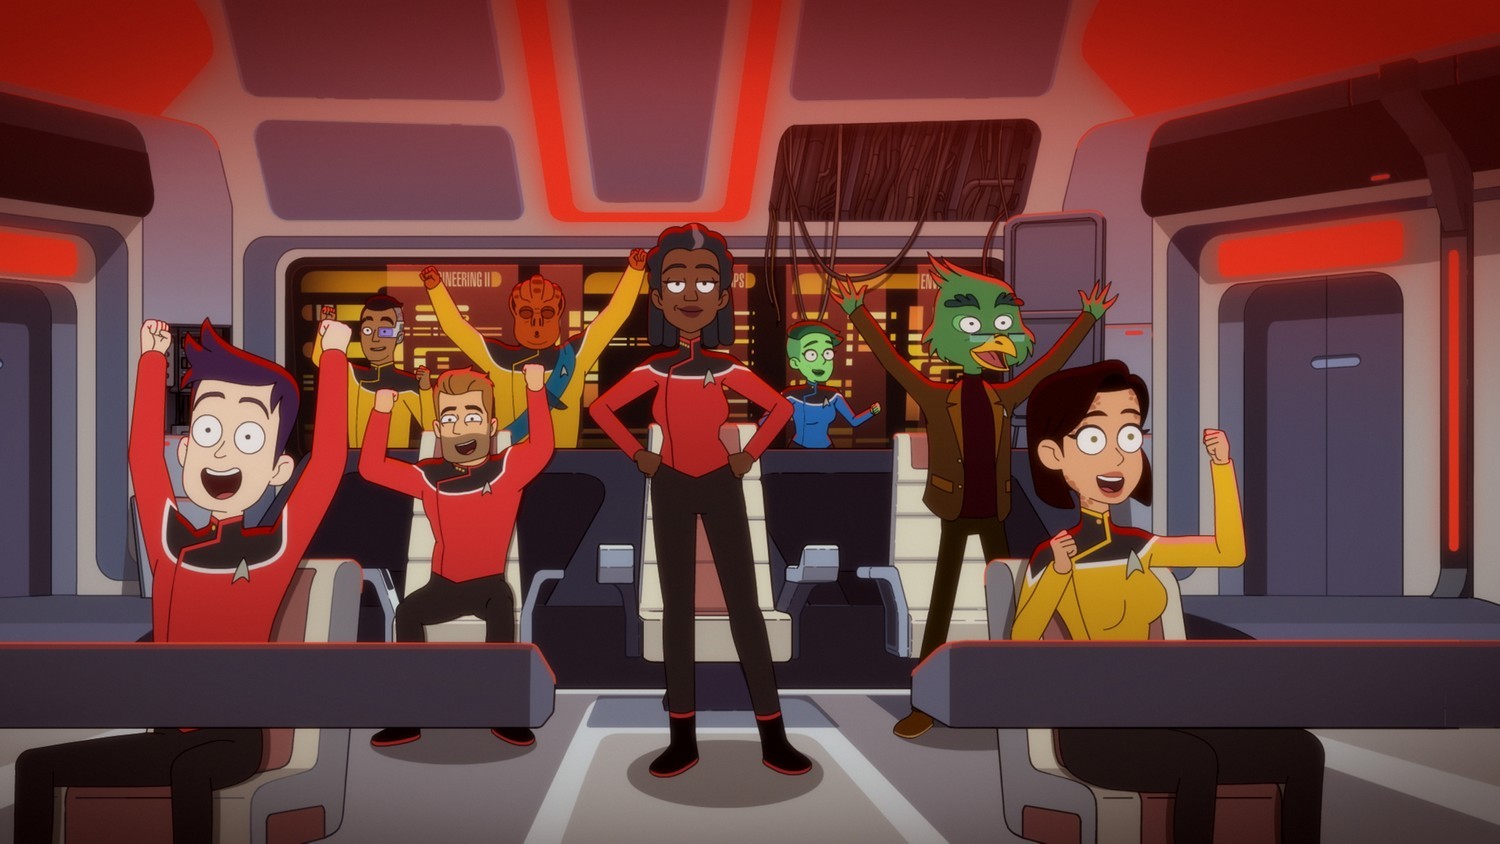 Still from the animated T.V. show Star Trek: Lower Decks. Here we see the whole crew sitting on the deck, celebrating.